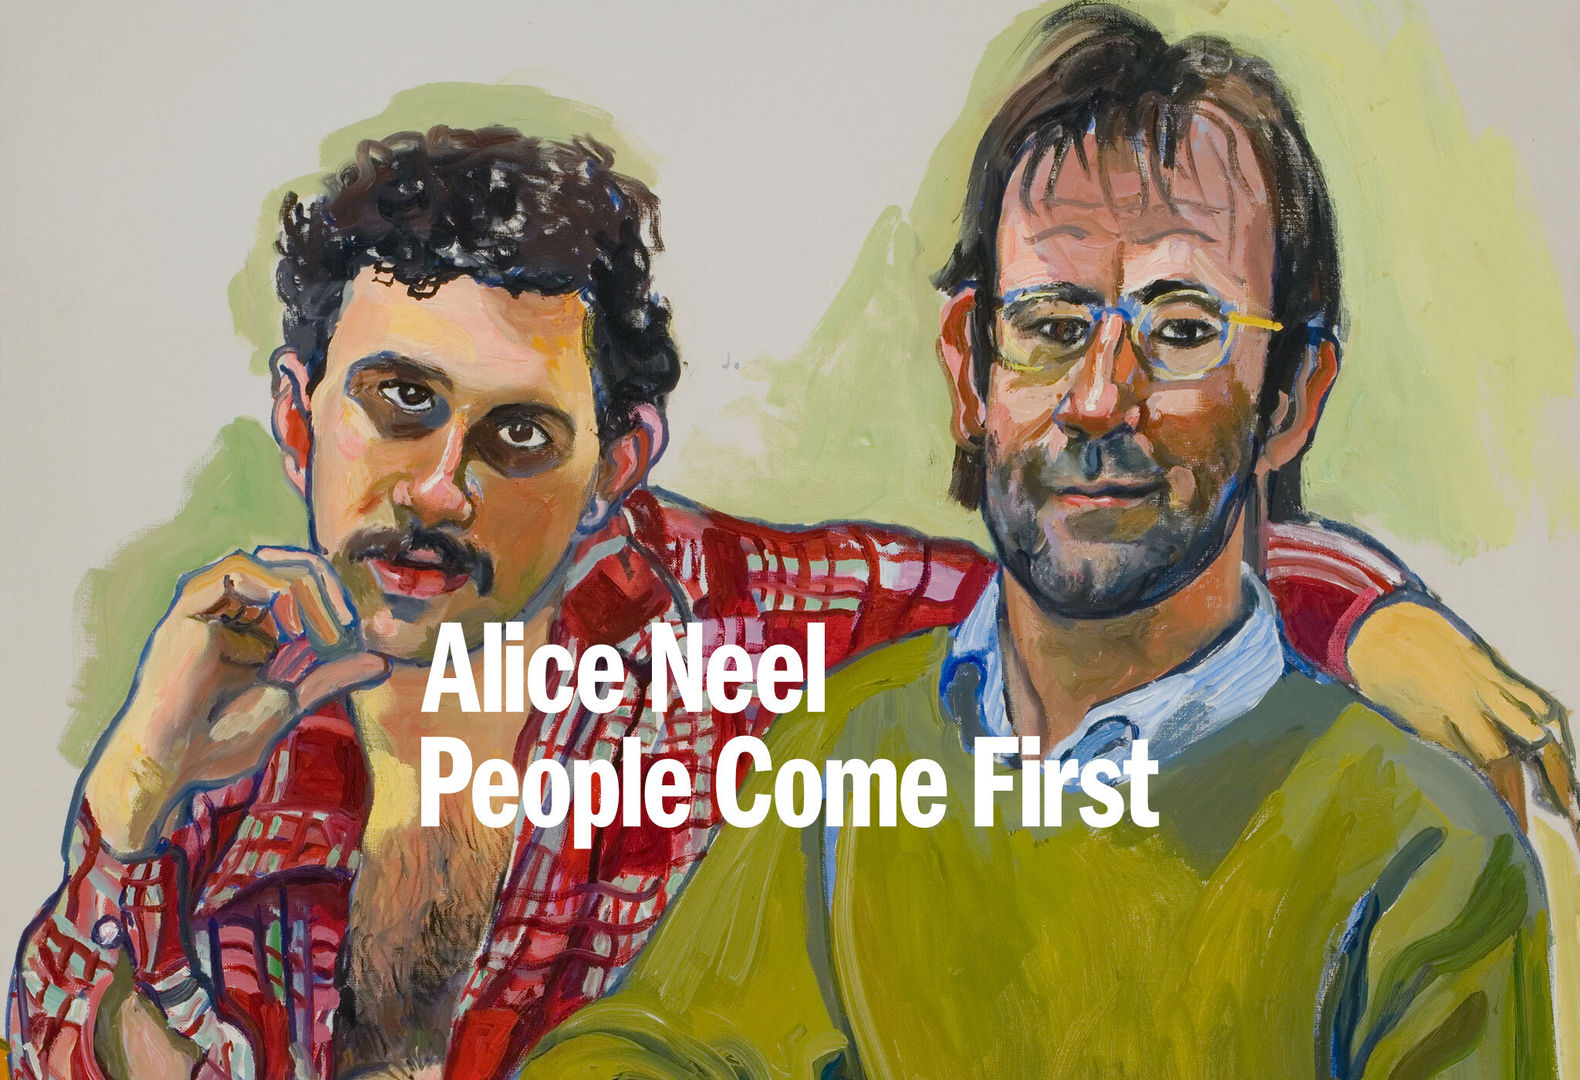 Portrait of two men: the one on the right dons a green sweater, a receding hairline, glasses, and stubble, while the other has an unbuttoned red plaid shirt, a mustache, his chin resting on his hand in a thoughtfol pose.